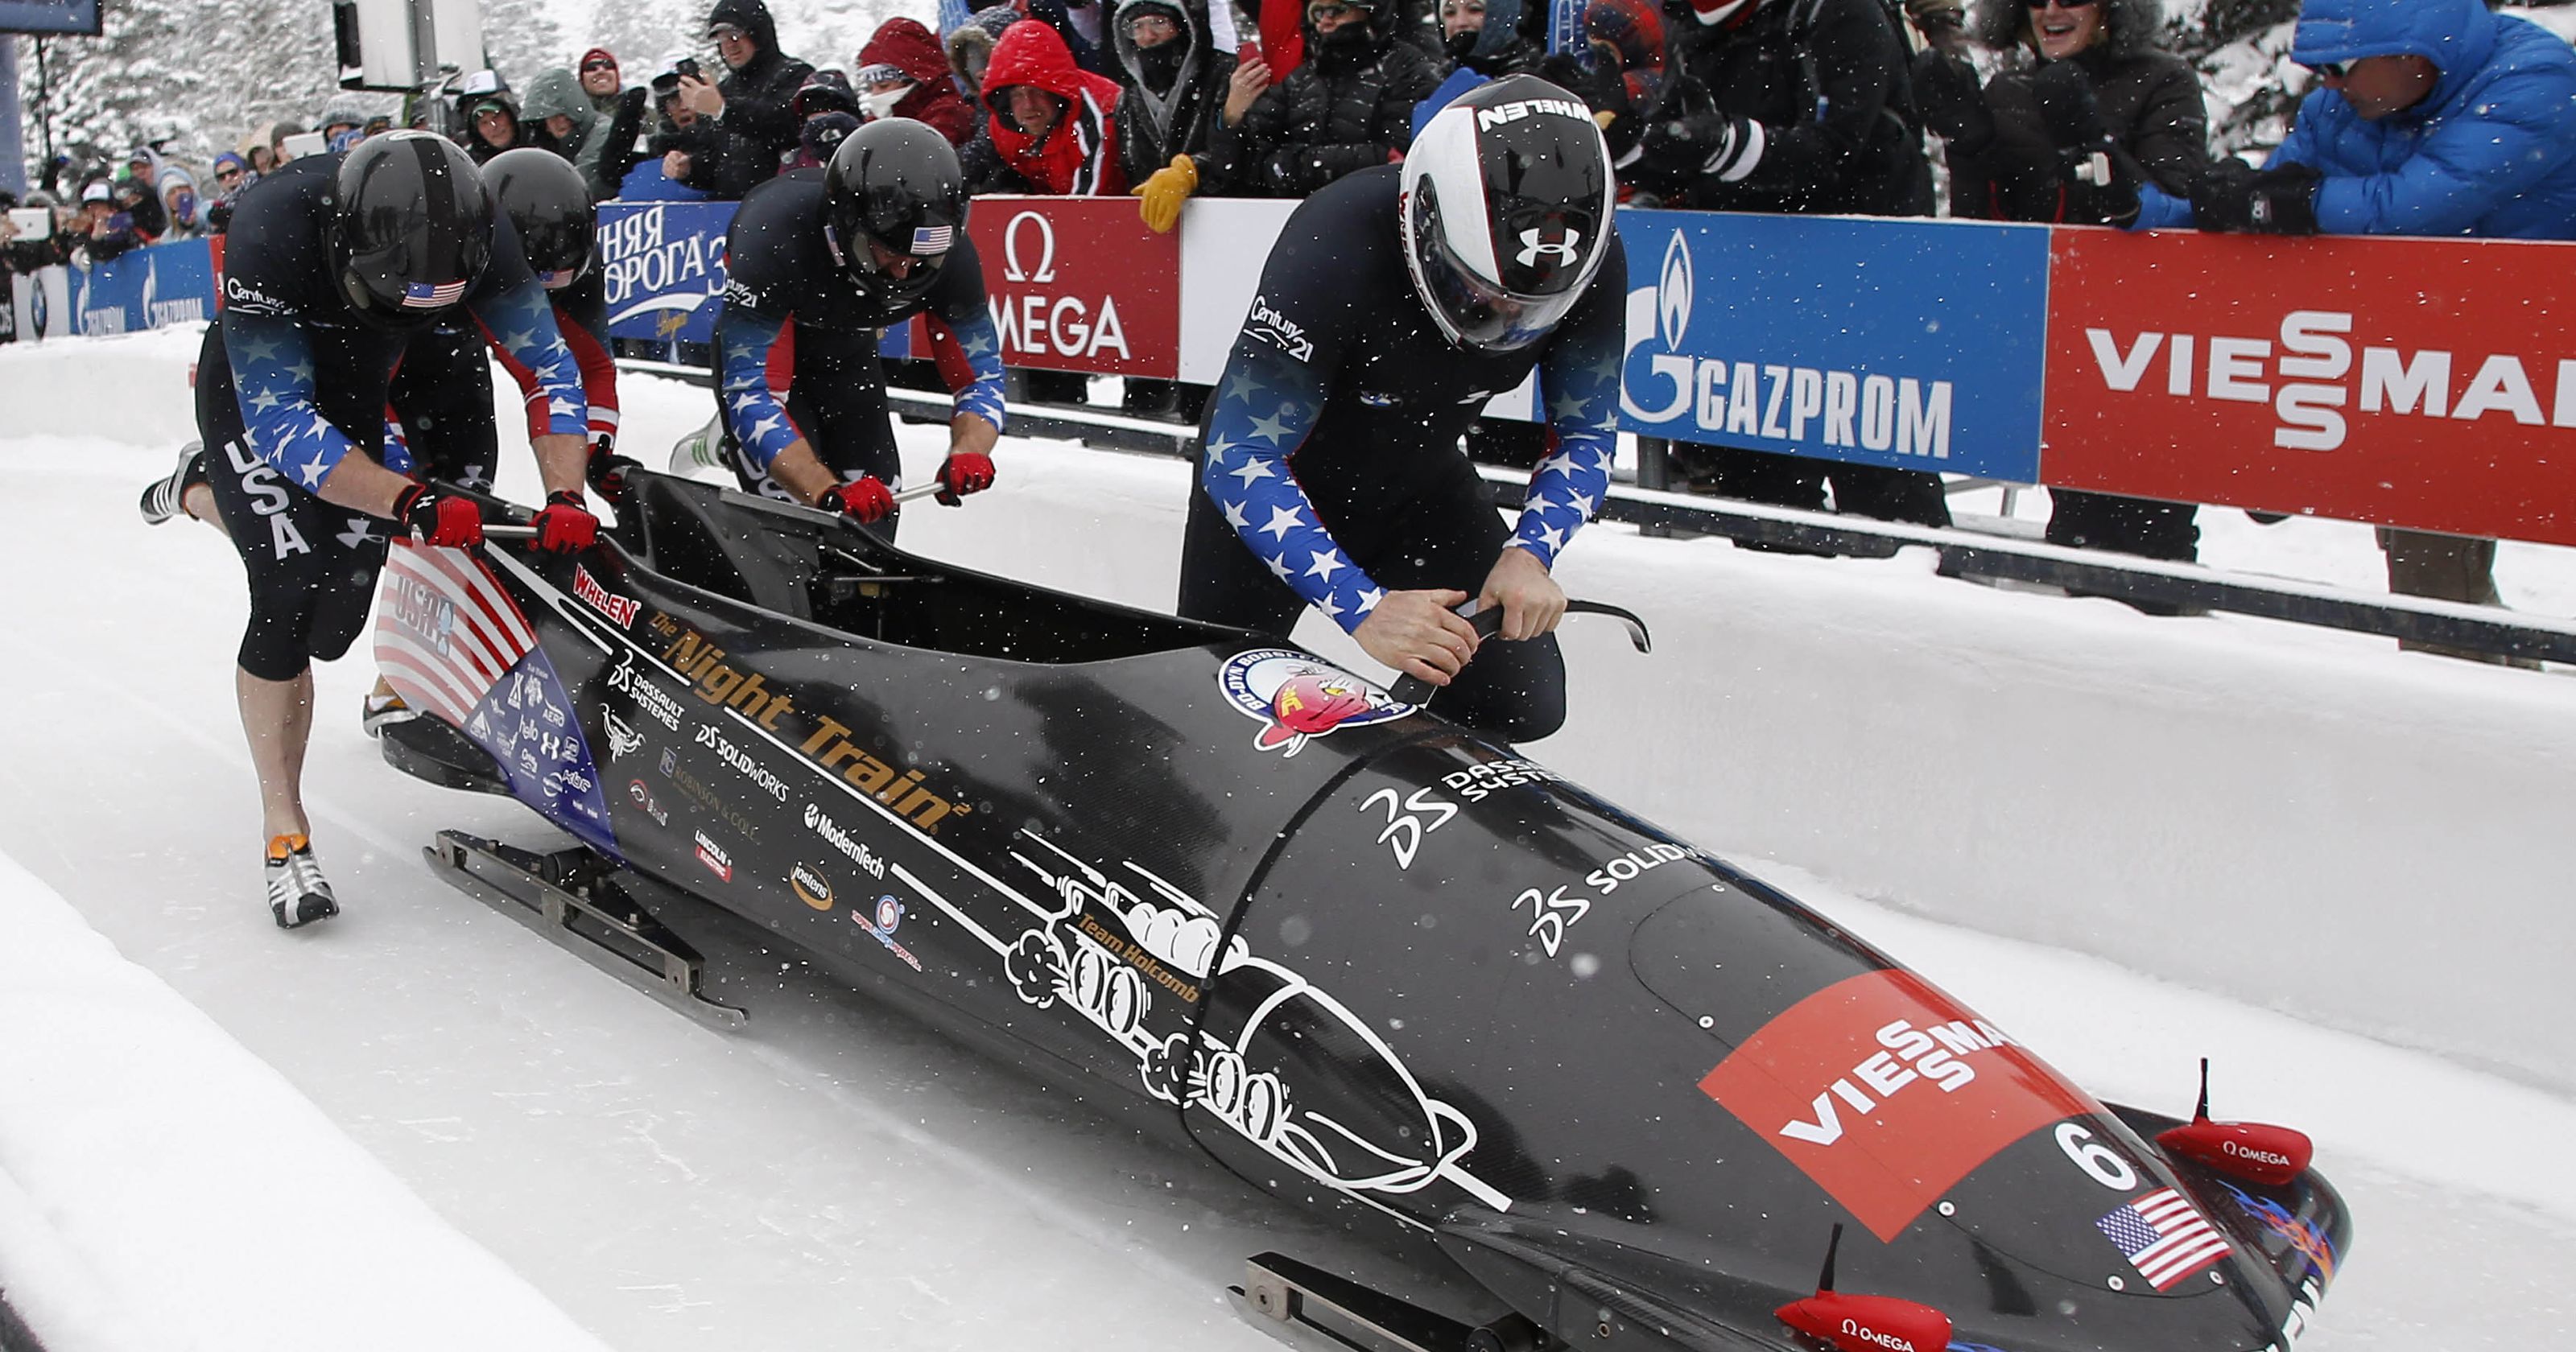 Bo-Dyn project brings innovation to bobsleds